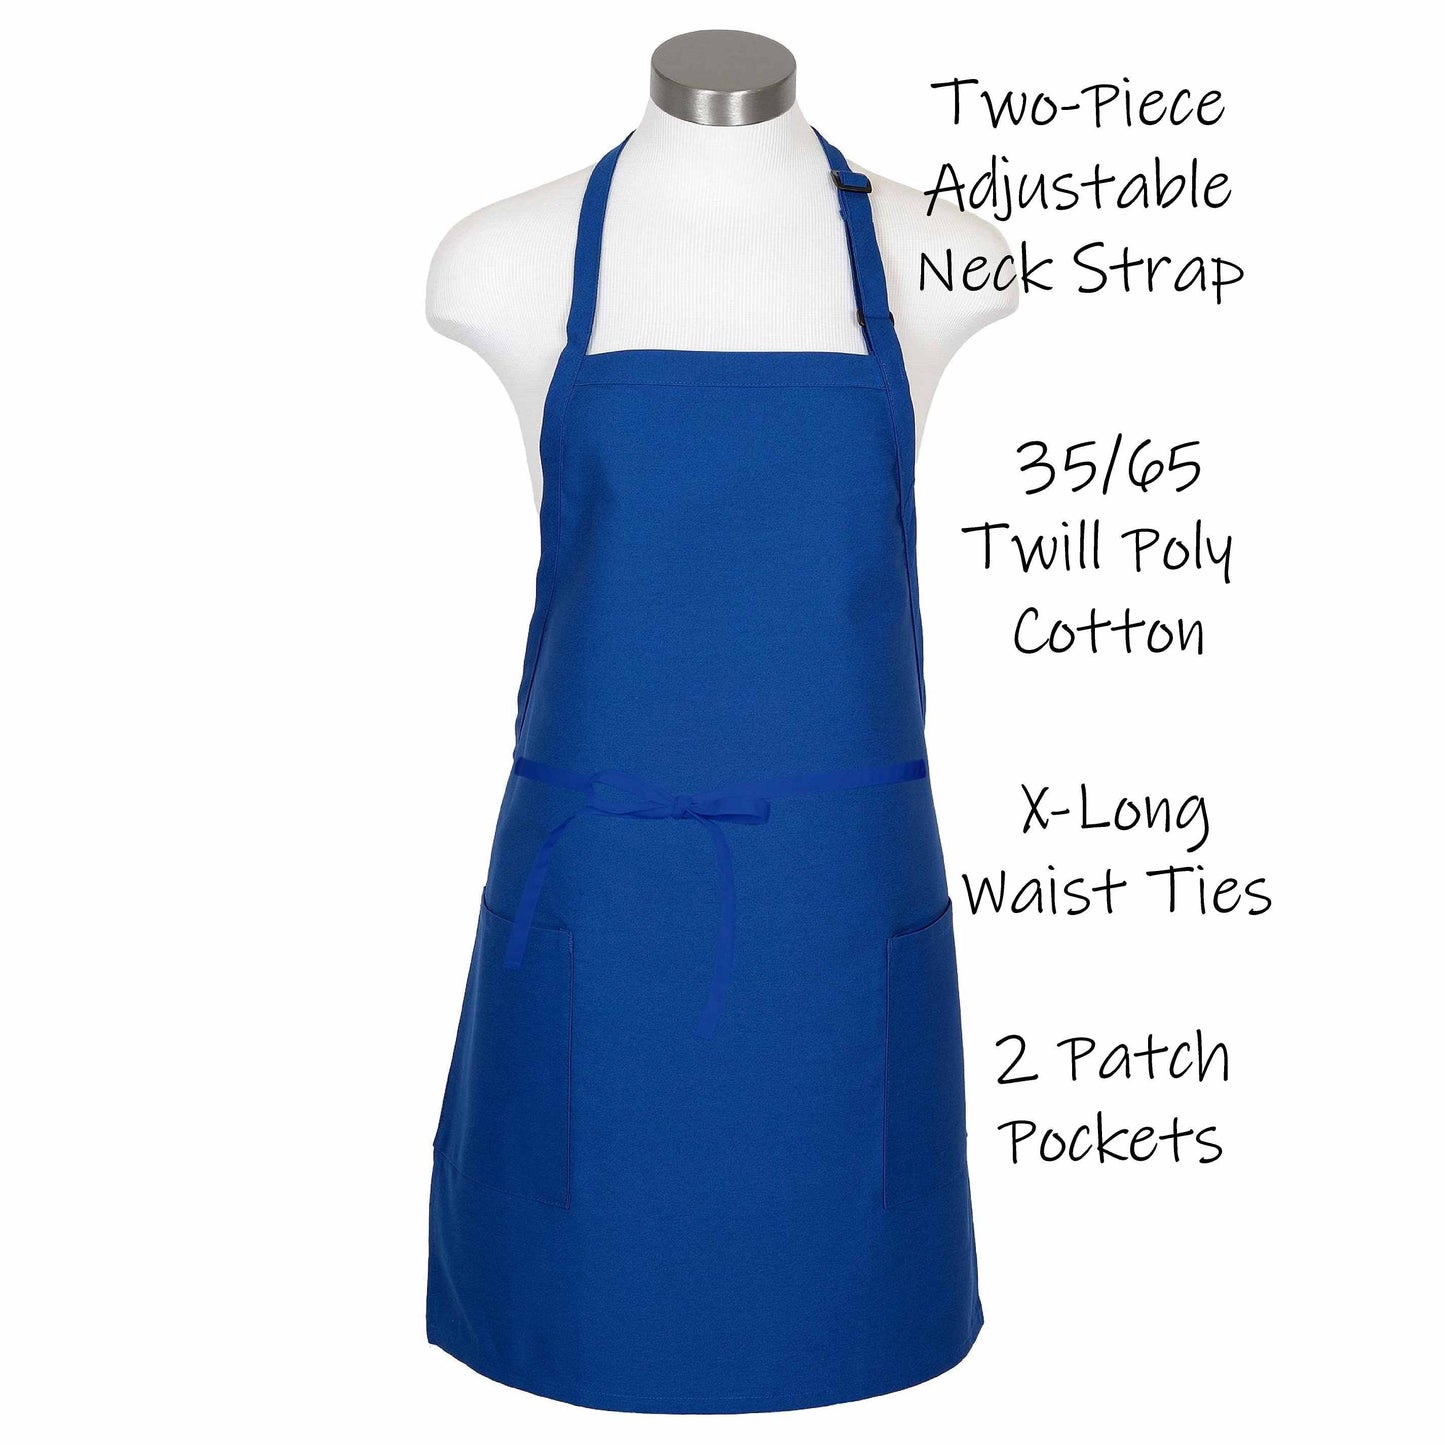 A Day Without Beer Kitchen Apron | Mens & Womens Unisex Aprons Adjustable | BBQ Cooking Apron